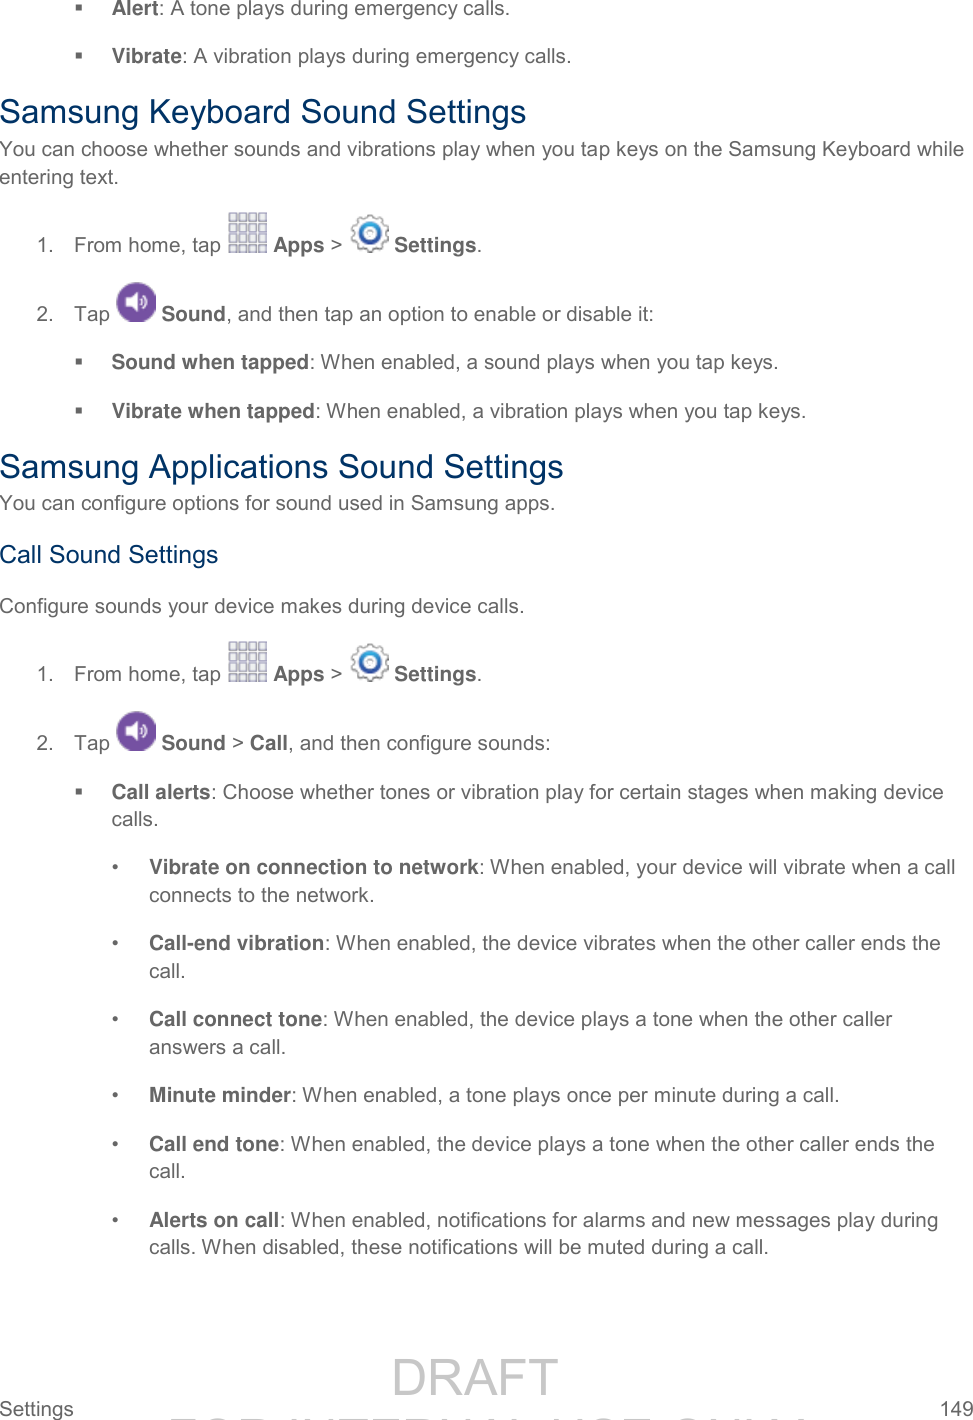                 DRAFT FOR INTERNAL USE ONLY Settings  149    Alert: A tone plays during emergency calls.  Vibrate: A vibration plays during emergency calls. Samsung Keyboard Sound Settings You can choose whether sounds and vibrations play when you tap keys on the Samsung Keyboard while entering text. 1.  From home, tap   Apps &gt;   Settings.  2.  Tap   Sound, and then tap an option to enable or disable it:  Sound when tapped: When enabled, a sound plays when you tap keys.  Vibrate when tapped: When enabled, a vibration plays when you tap keys. Samsung Applications Sound Settings You can configure options for sound used in Samsung apps. Call Sound Settings Configure sounds your device makes during device calls. 1.  From home, tap   Apps &gt;   Settings.  2.  Tap   Sound &gt; Call, and then configure sounds:  Call alerts: Choose whether tones or vibration play for certain stages when making device calls. • Vibrate on connection to network: When enabled, your device will vibrate when a call connects to the network. • Call-end vibration: When enabled, the device vibrates when the other caller ends the call. • Call connect tone: When enabled, the device plays a tone when the other caller answers a call.  • Minute minder: When enabled, a tone plays once per minute during a call. • Call end tone: When enabled, the device plays a tone when the other caller ends the call.  • Alerts on call: When enabled, notifications for alarms and new messages play during calls. When disabled, these notifications will be muted during a call. 